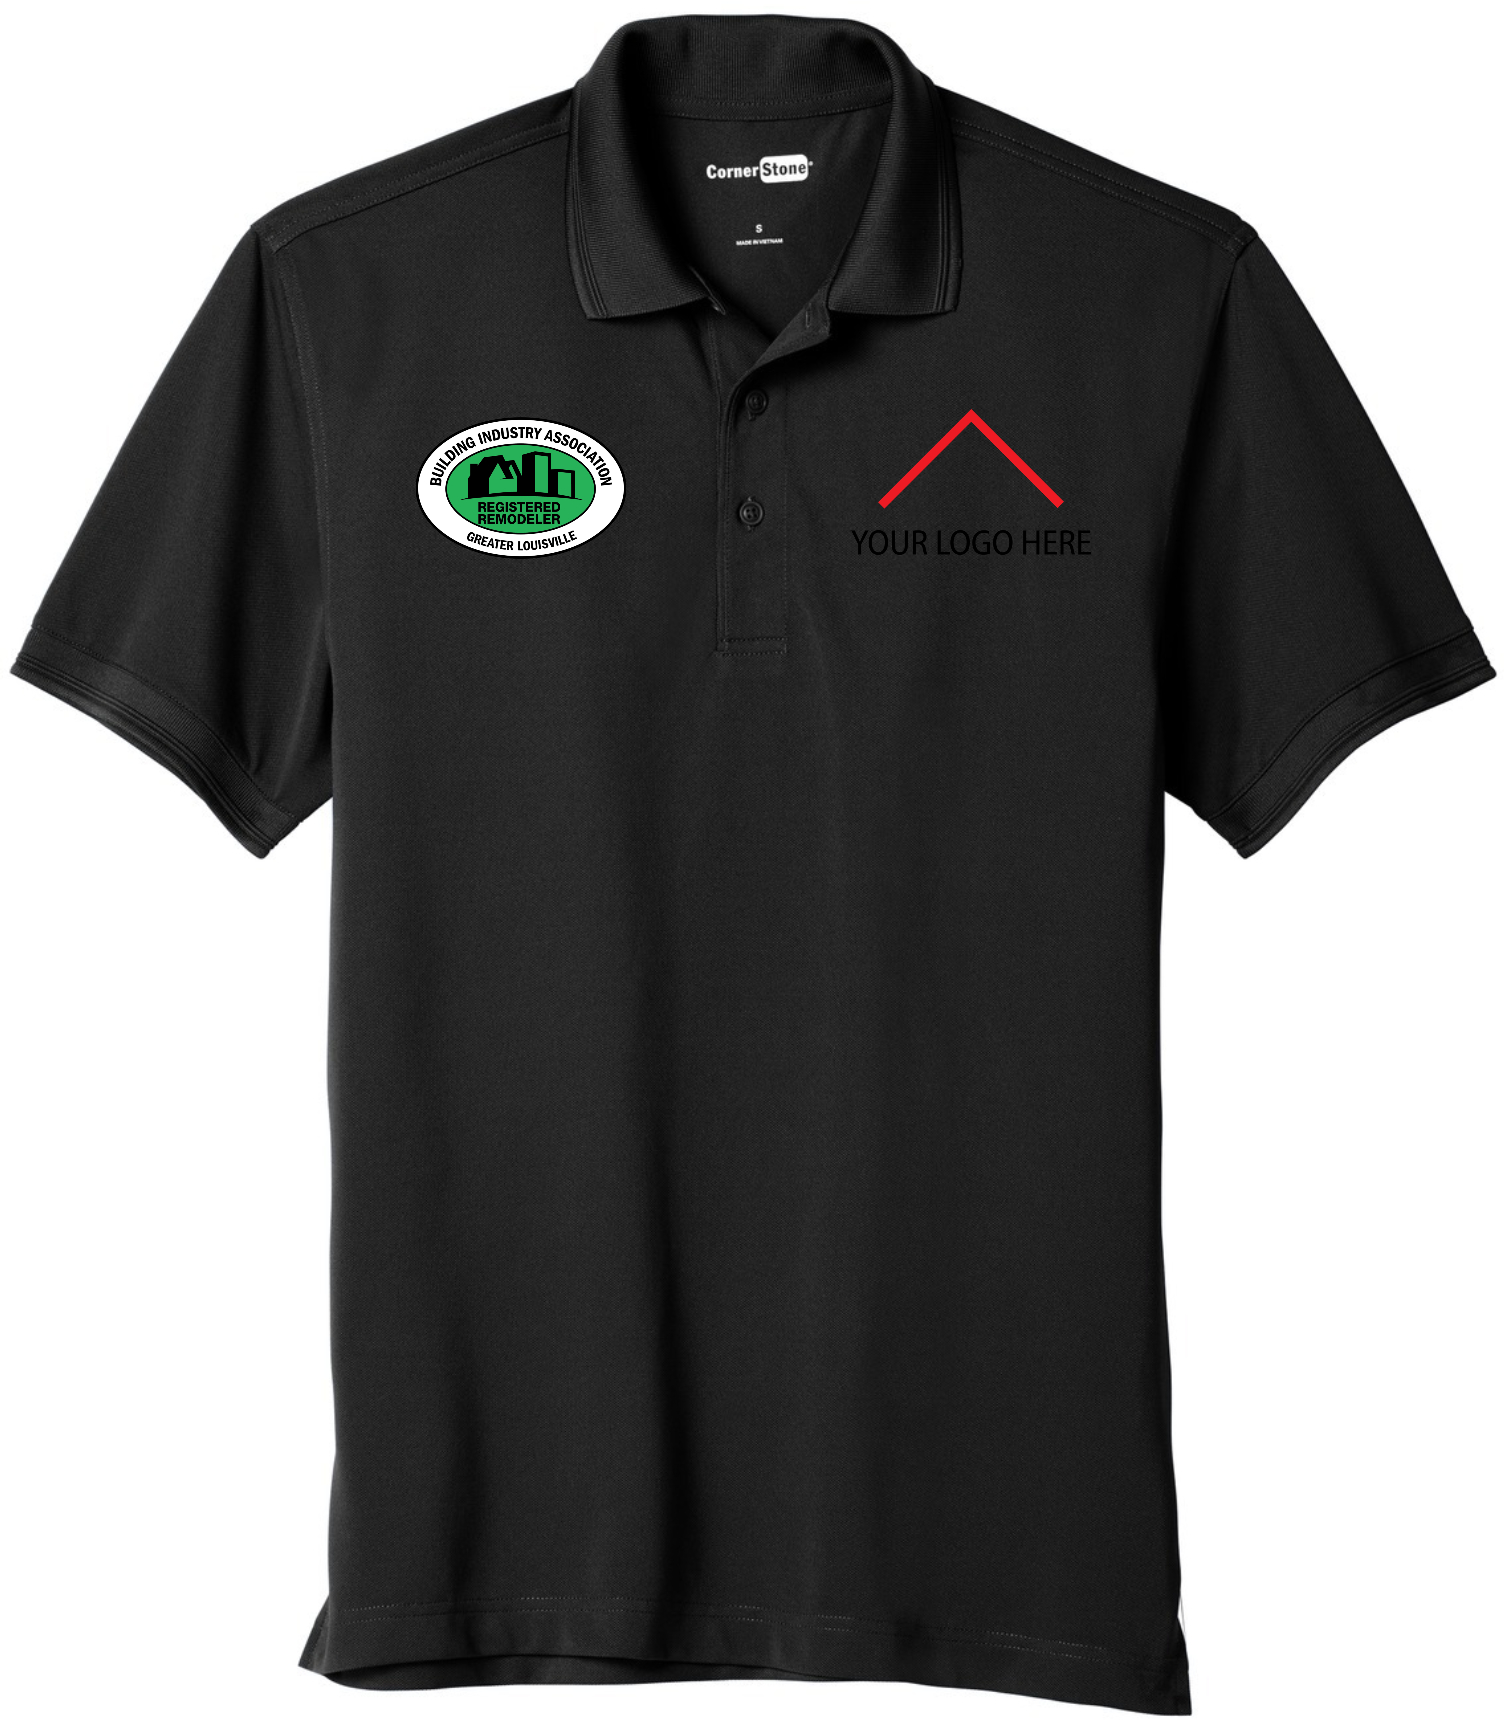 Registered Remodeler - CornerStone ® Industrial Snag-Proof Pique Polo - CS4020 (Add Your Own)